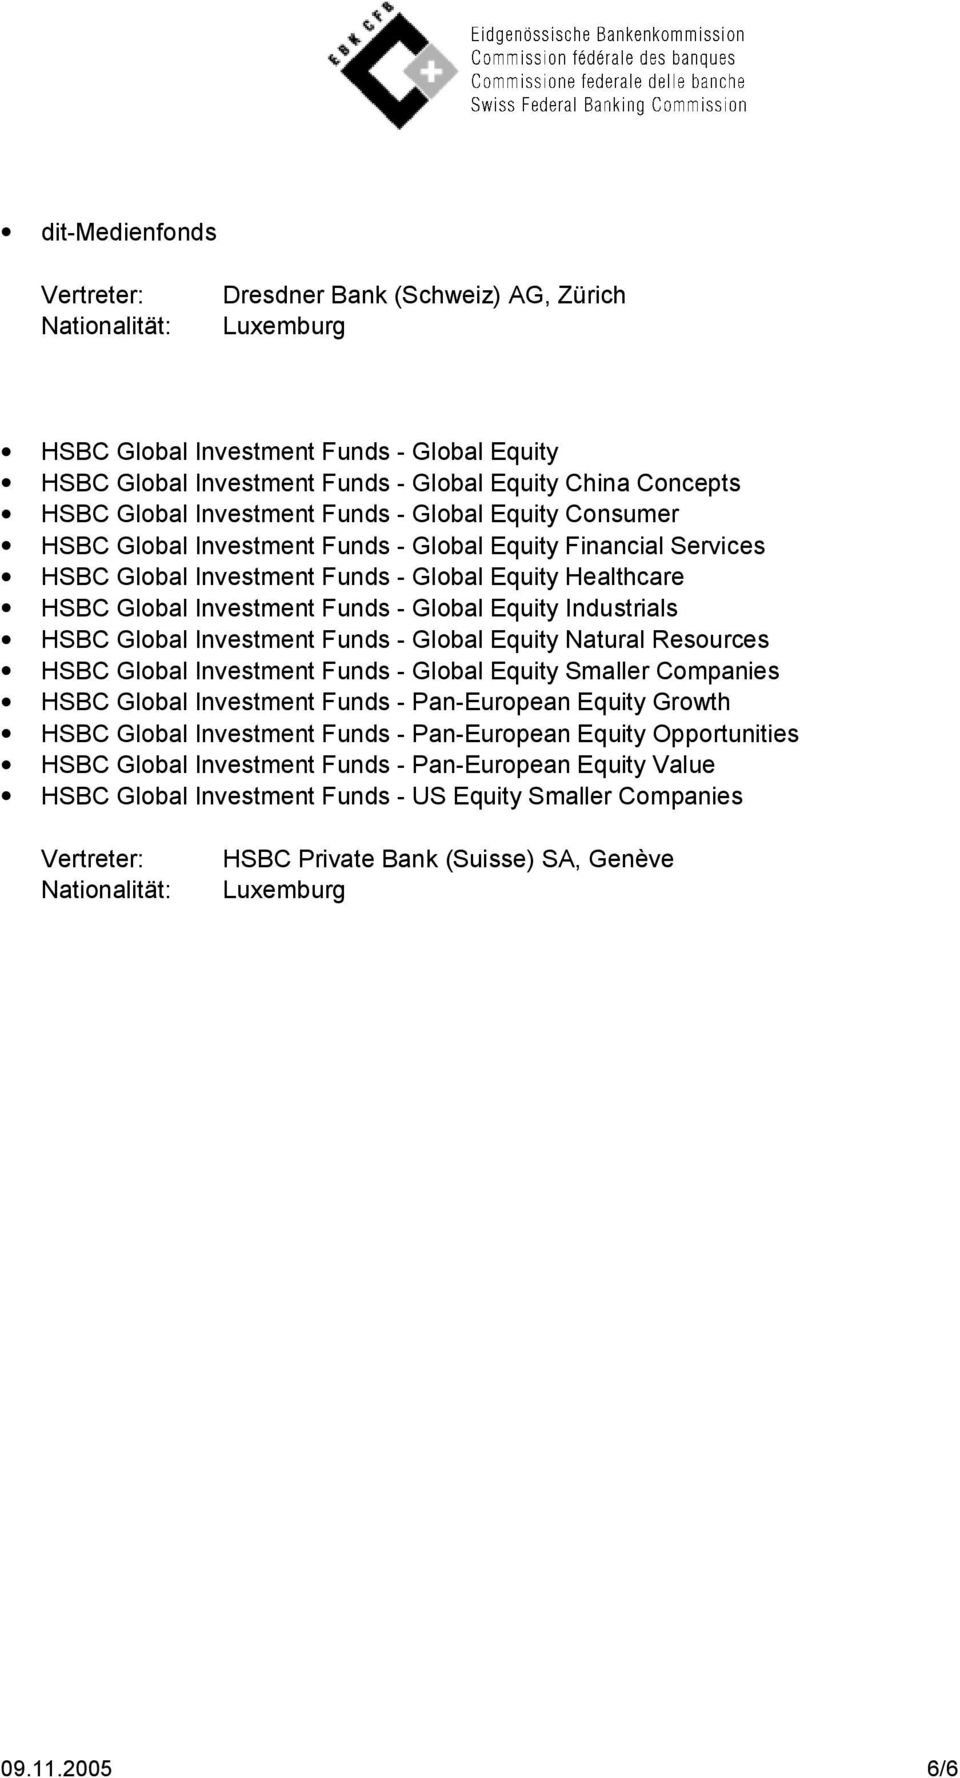 Global Investment Funds - Global Equity Natural Resources HSBC Global Investment Funds - Global Equity Smaller Companies HSBC Global Investment Funds - Pan-European Equity Growth HSBC Global